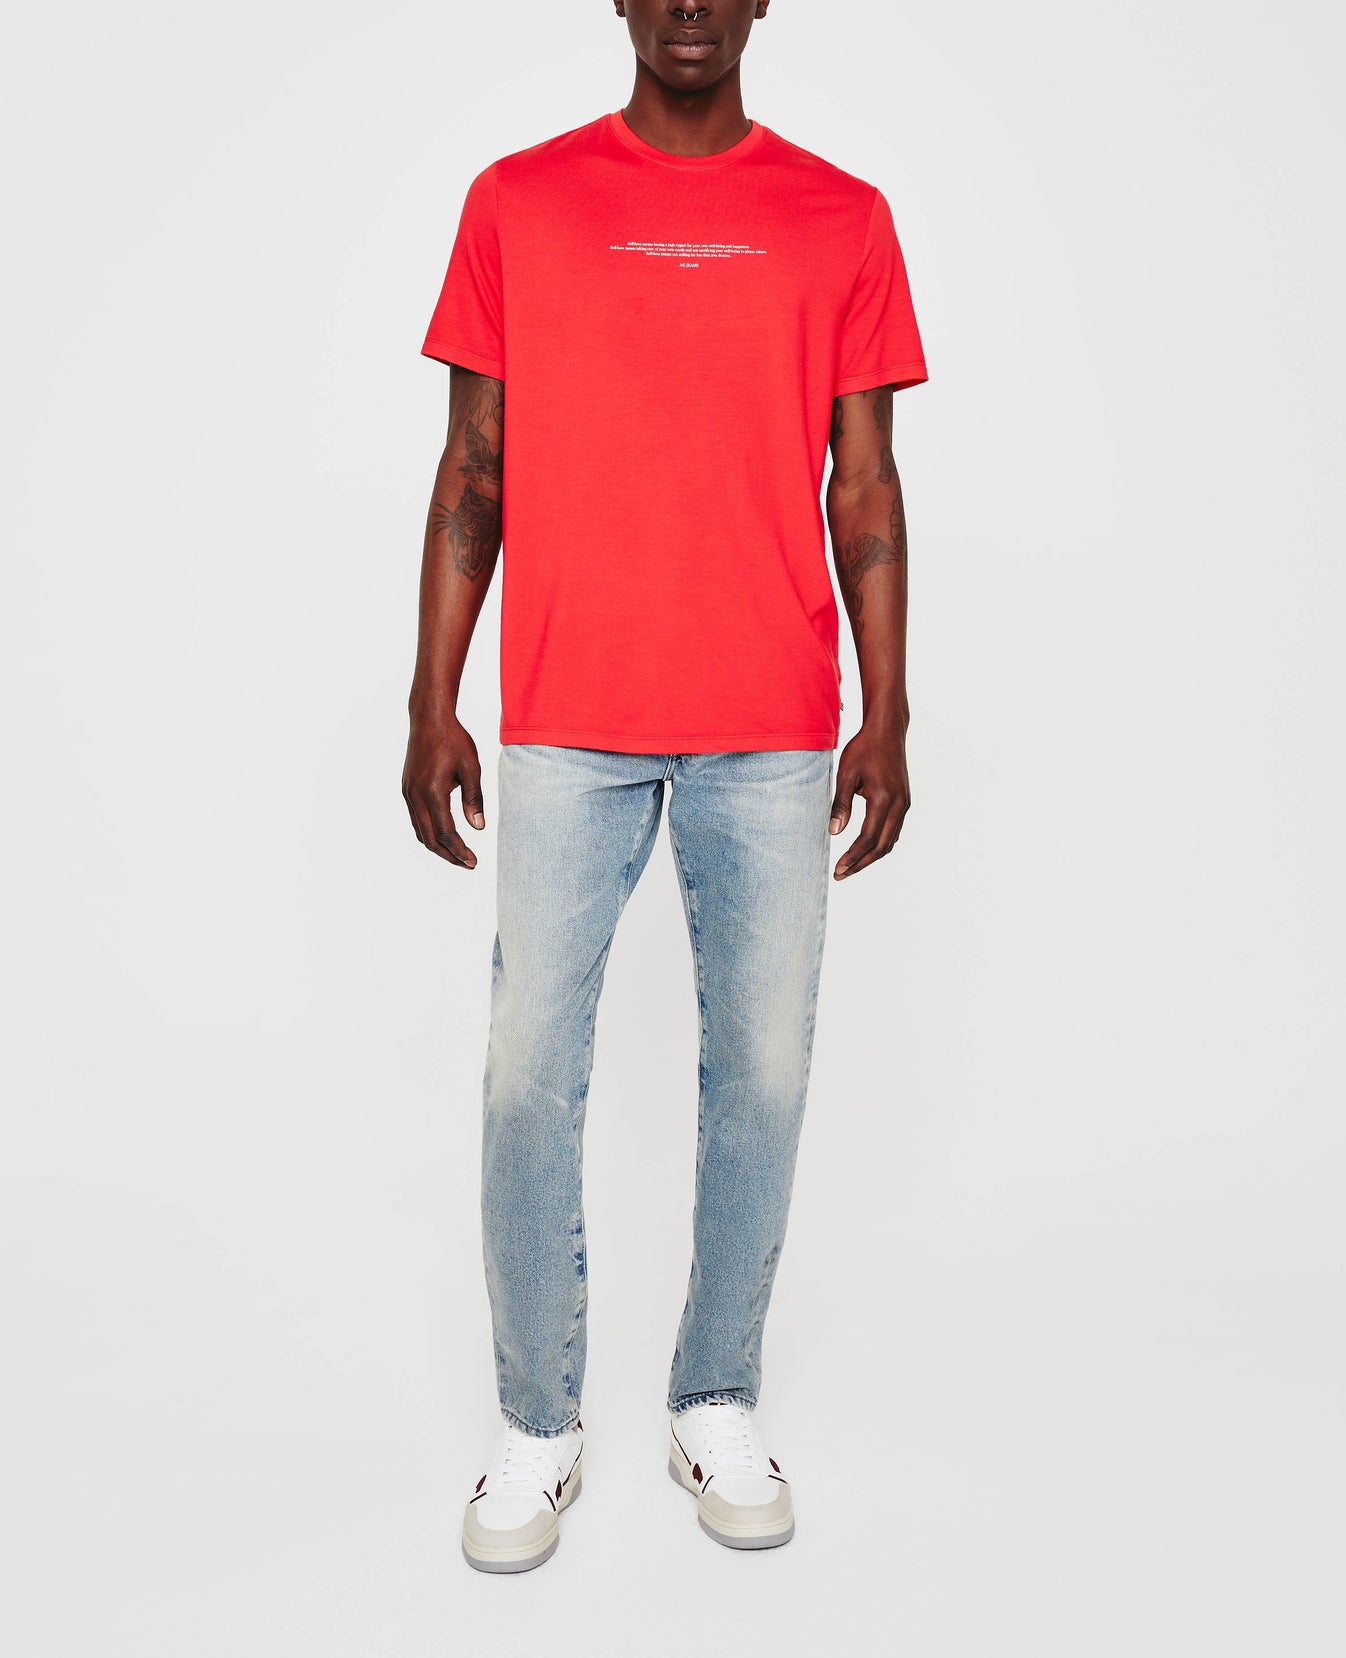 Bryce Crew Be Yourself Clever Red Mens Top Photo 2